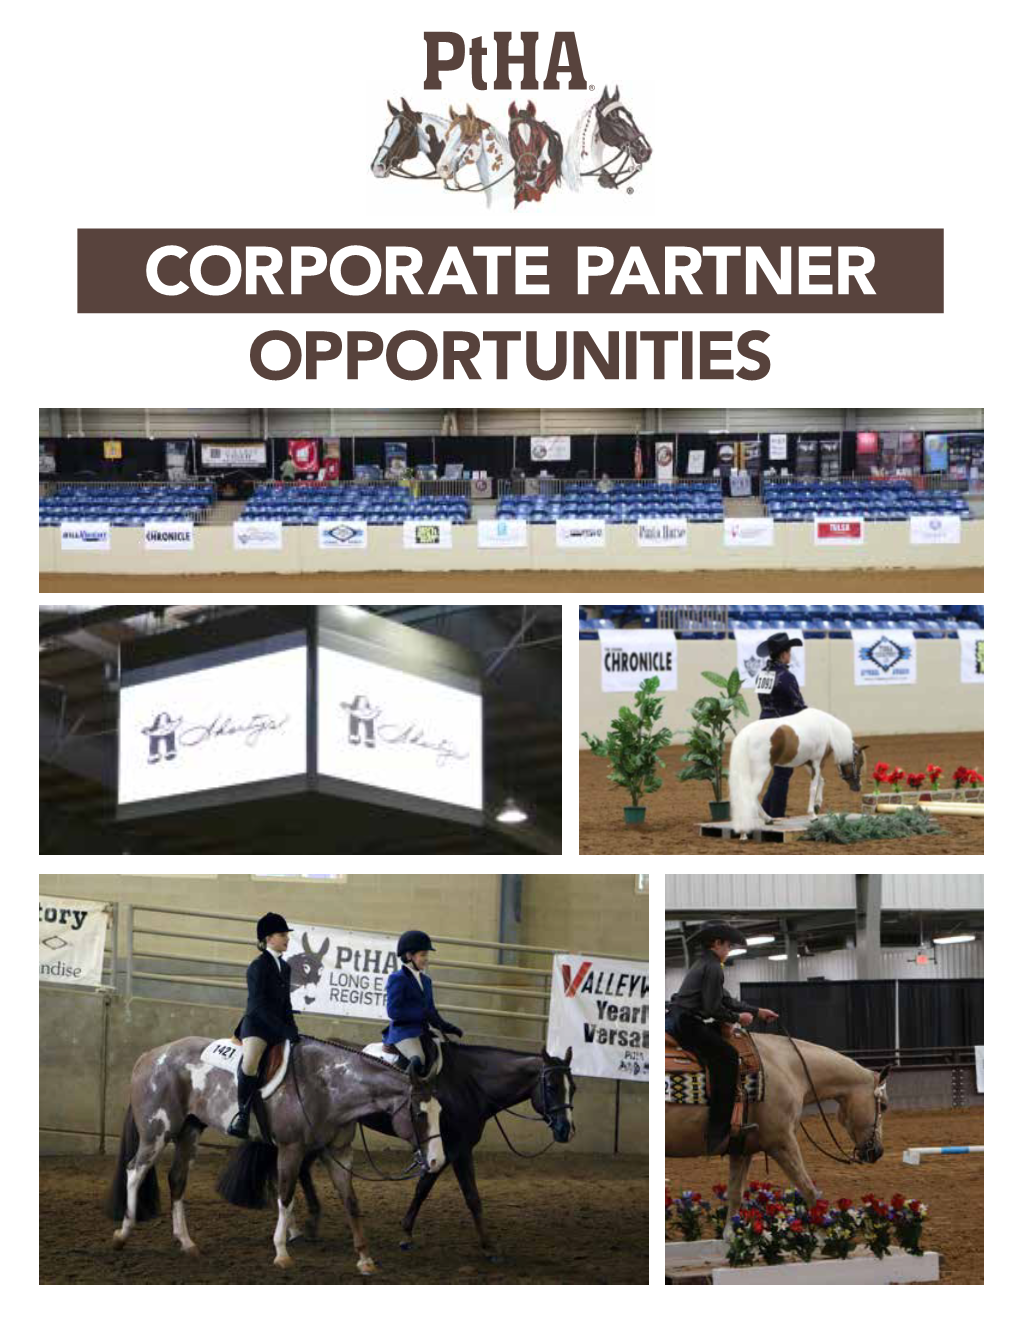 CORPORATE PARTNER OPPORTUNITIES ABOUT Ptha®